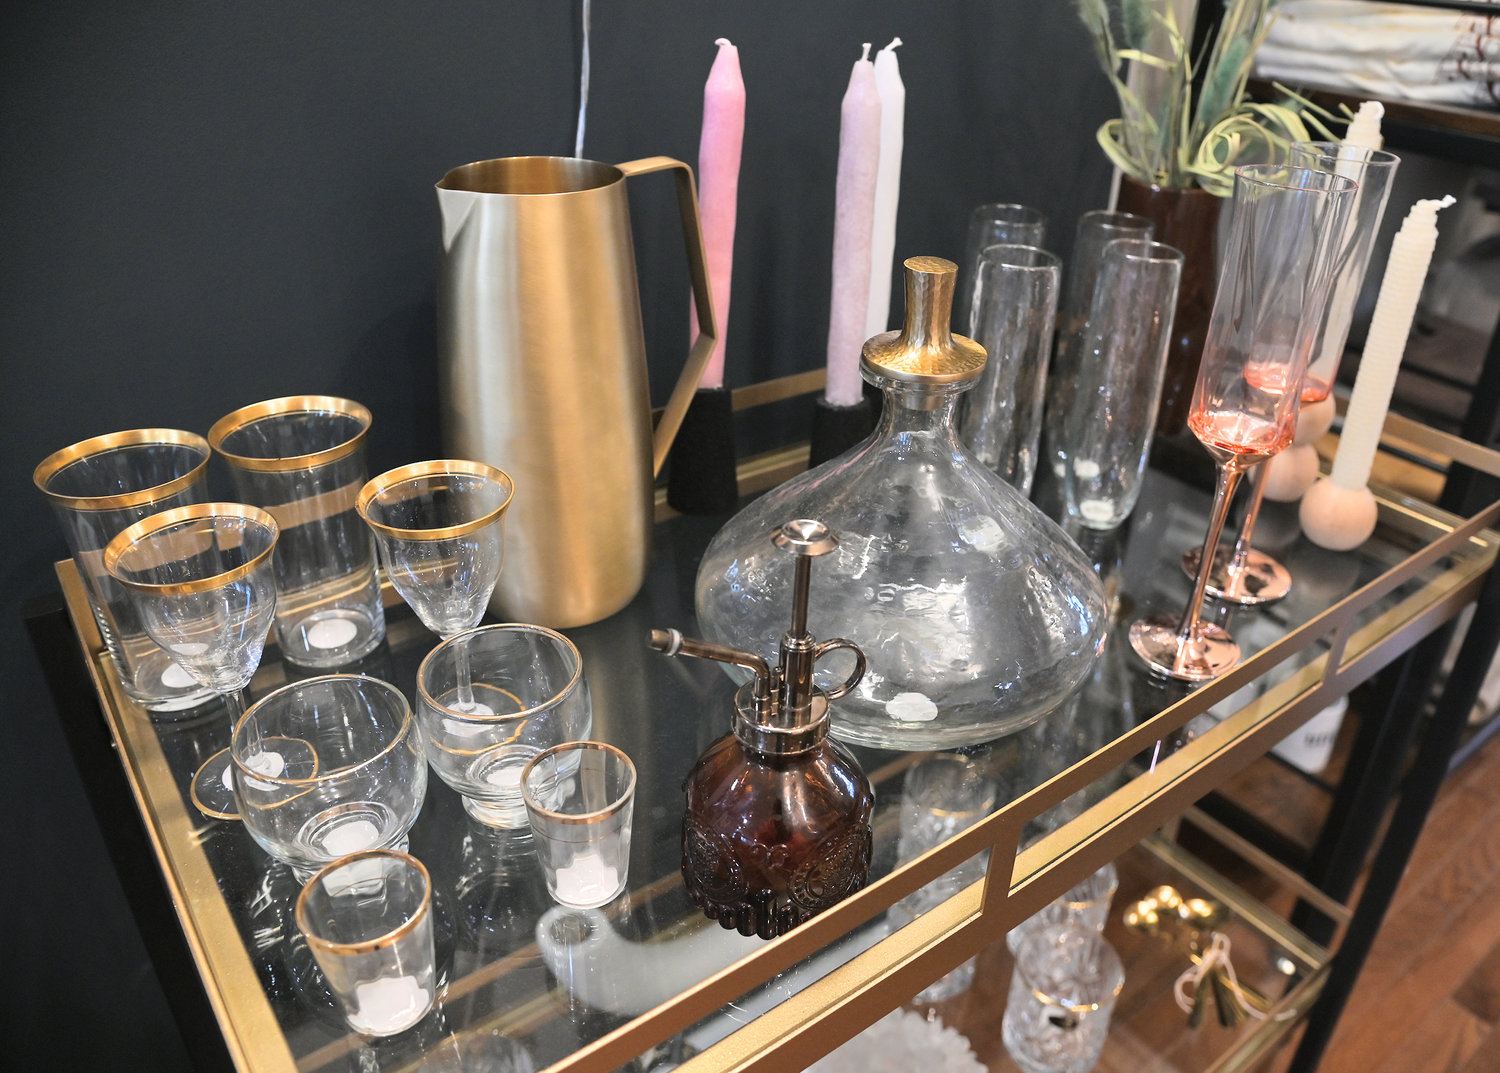 A bar cart, glassware, and more on display at Abode.